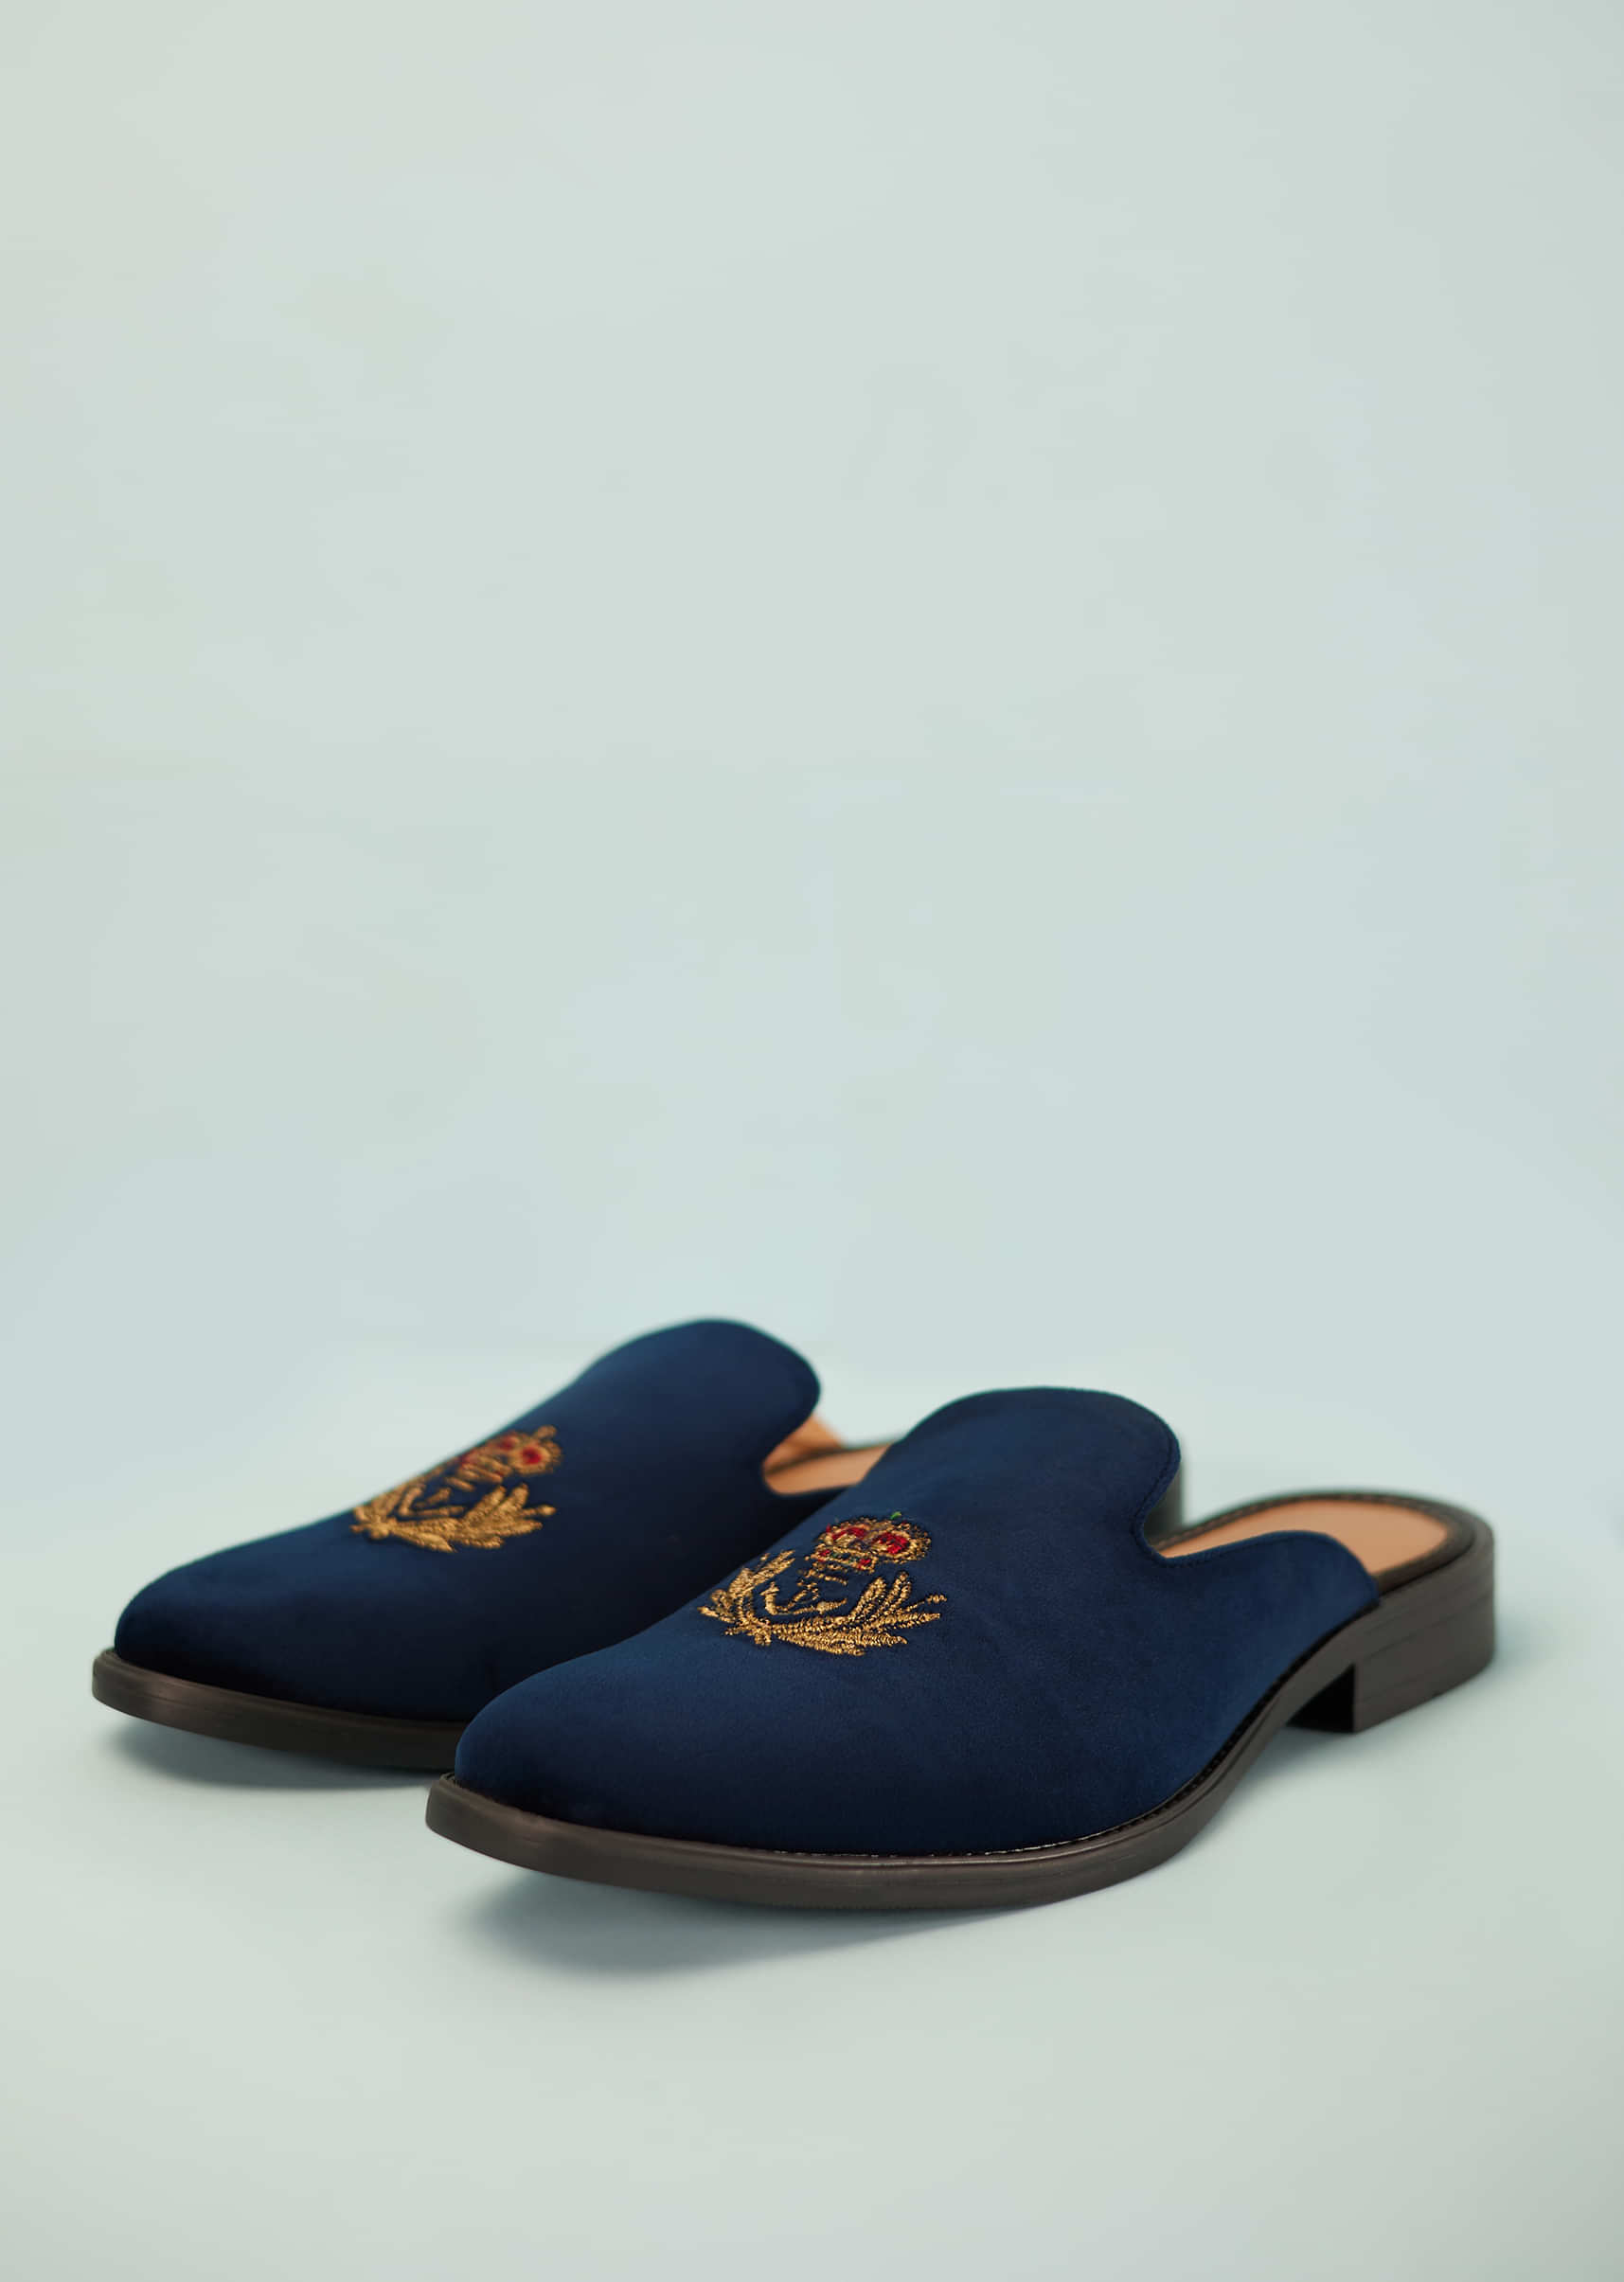 Blue Mules For Men In Suede With Embroidery